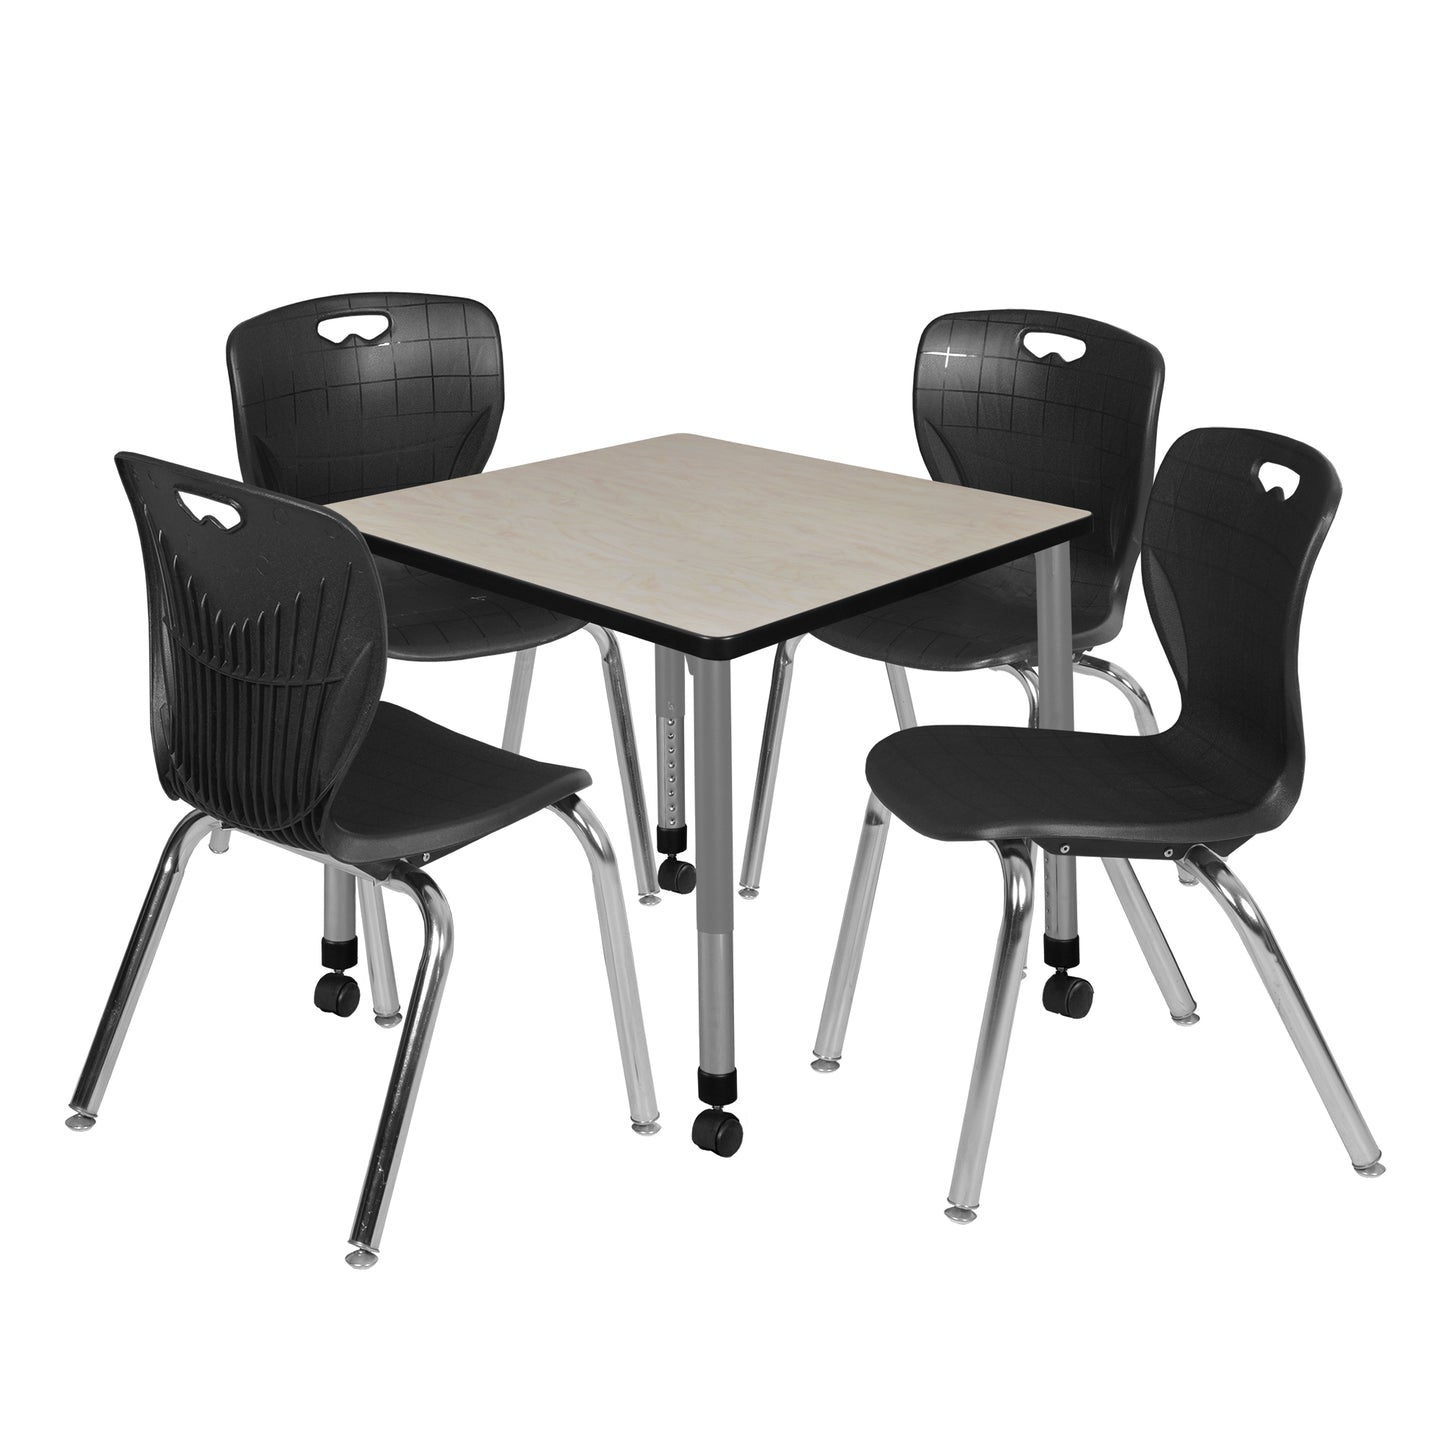 Regency Kee 30 in. Square Adjustable Classroom Table & 4 Andy 18 in. Stack Chairs